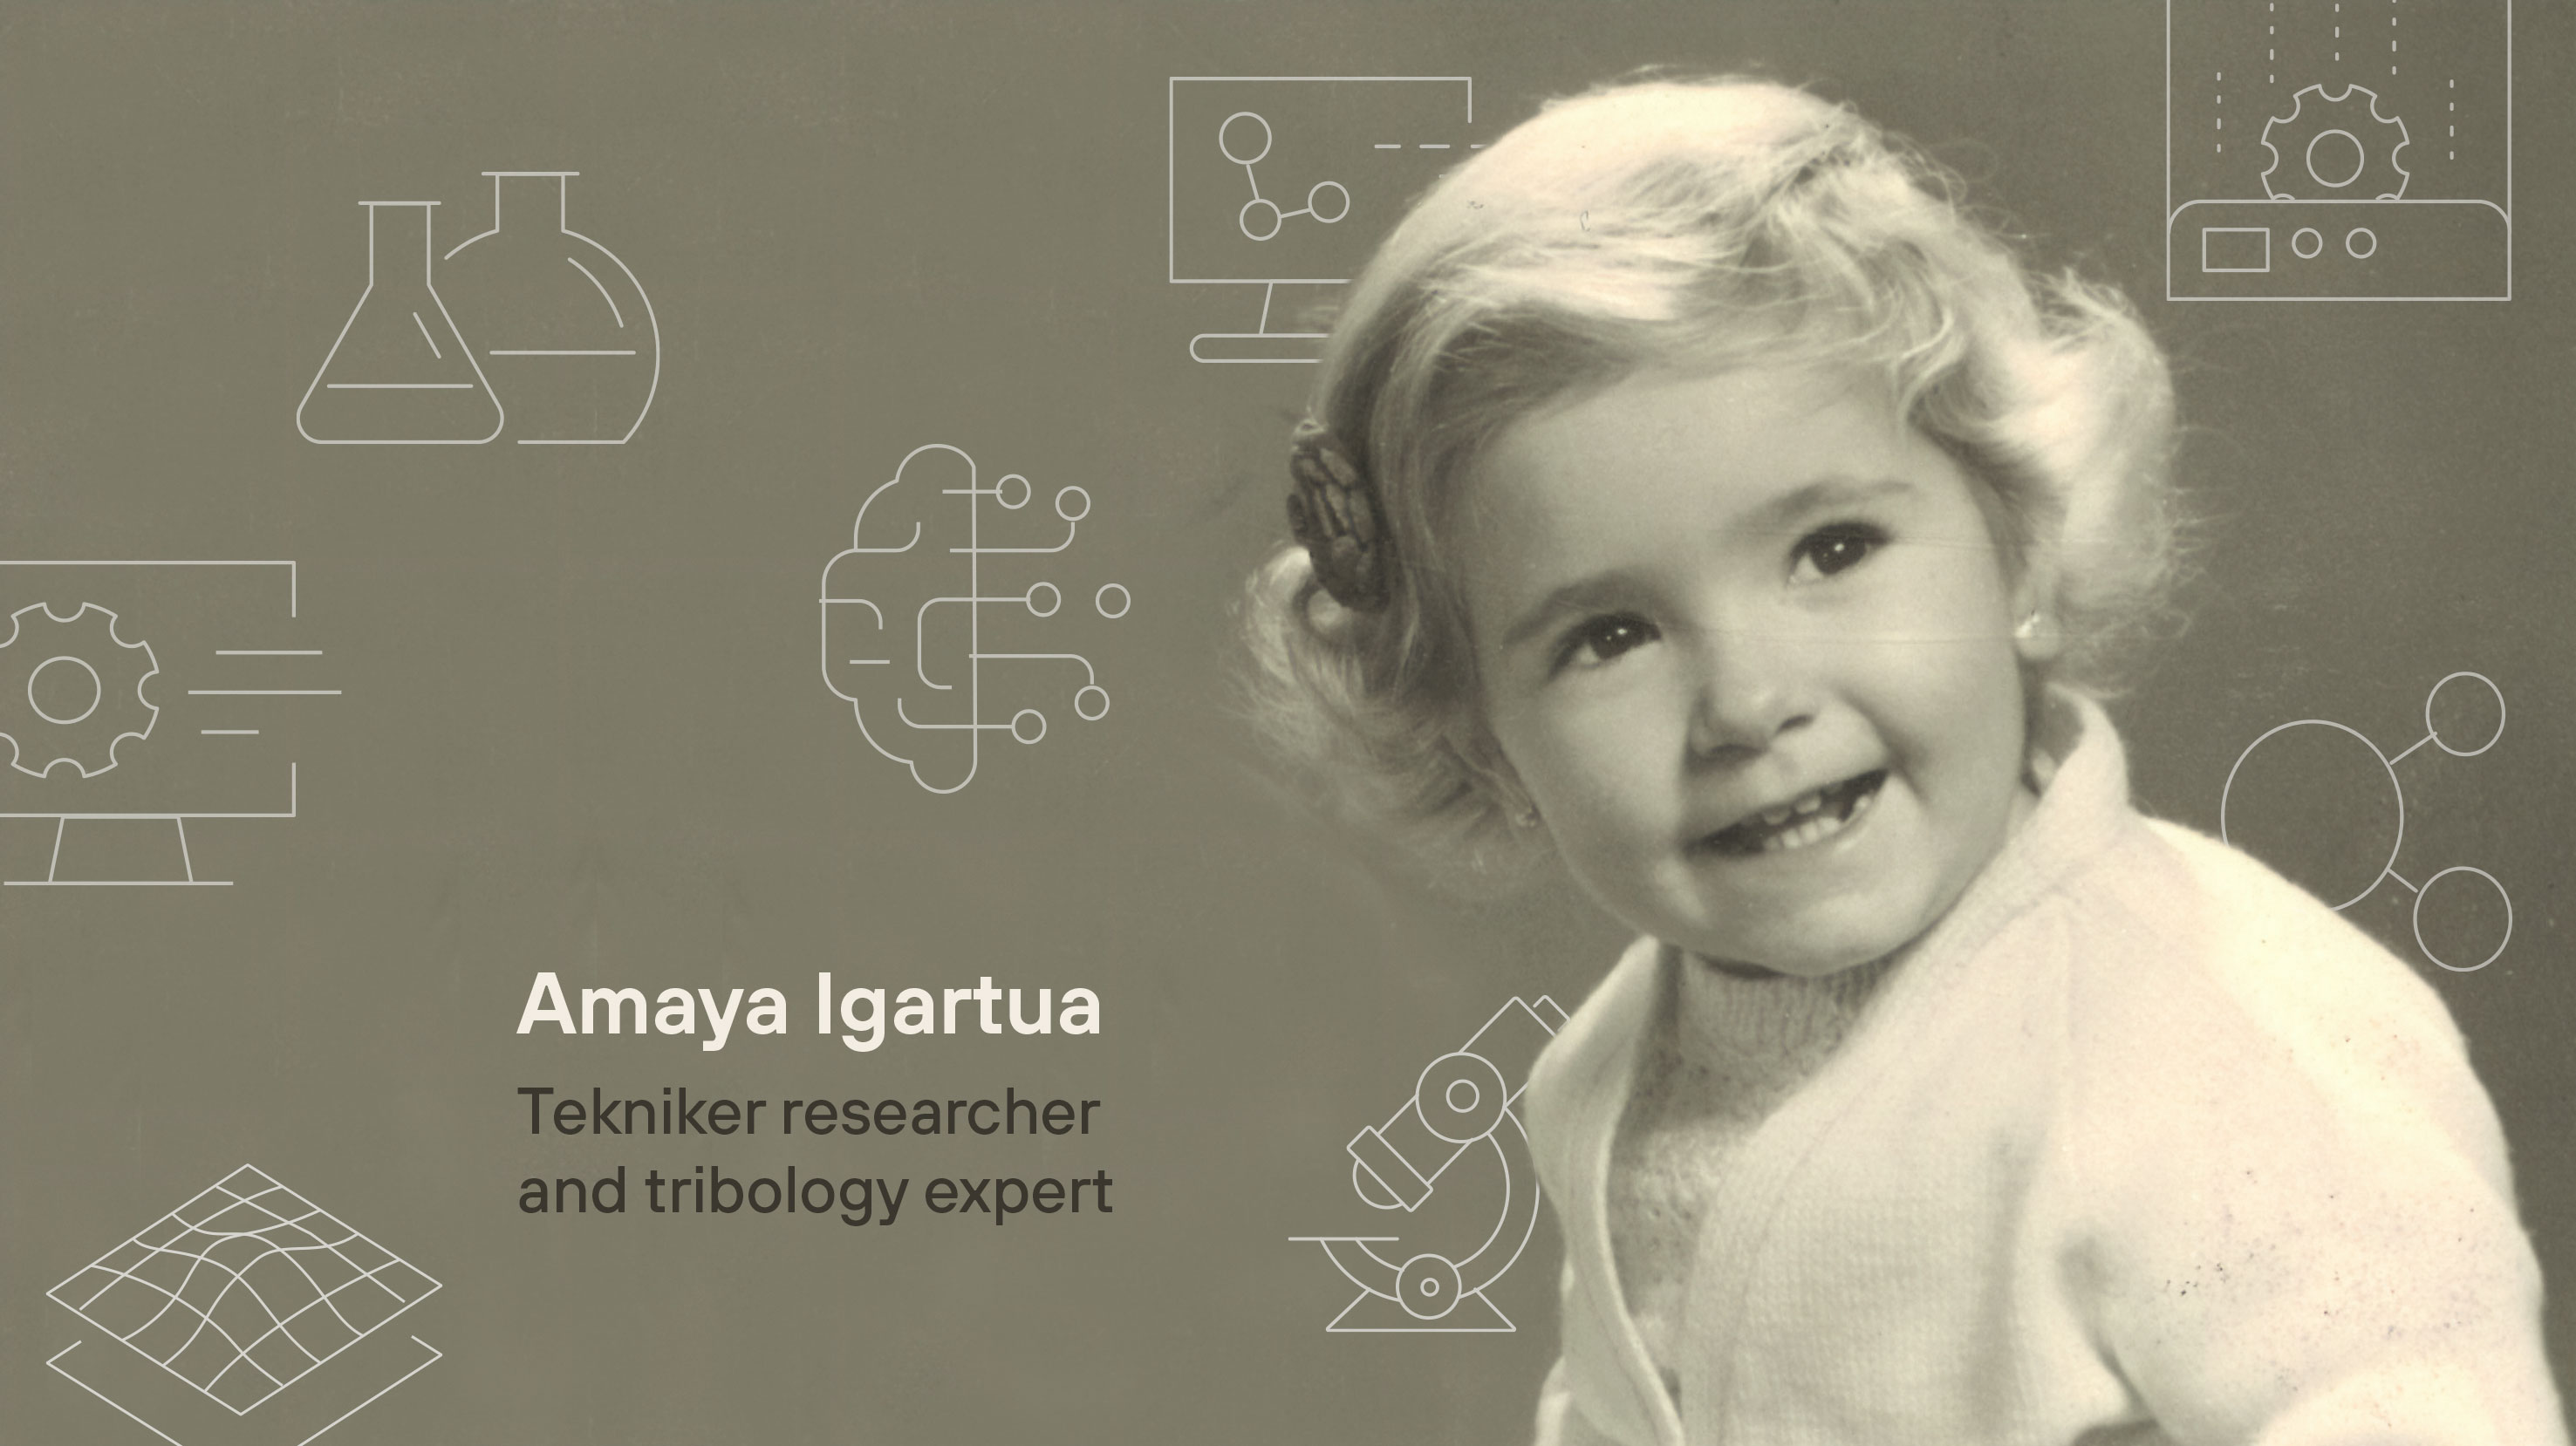 International day of women and girls in science, 11F, researchers